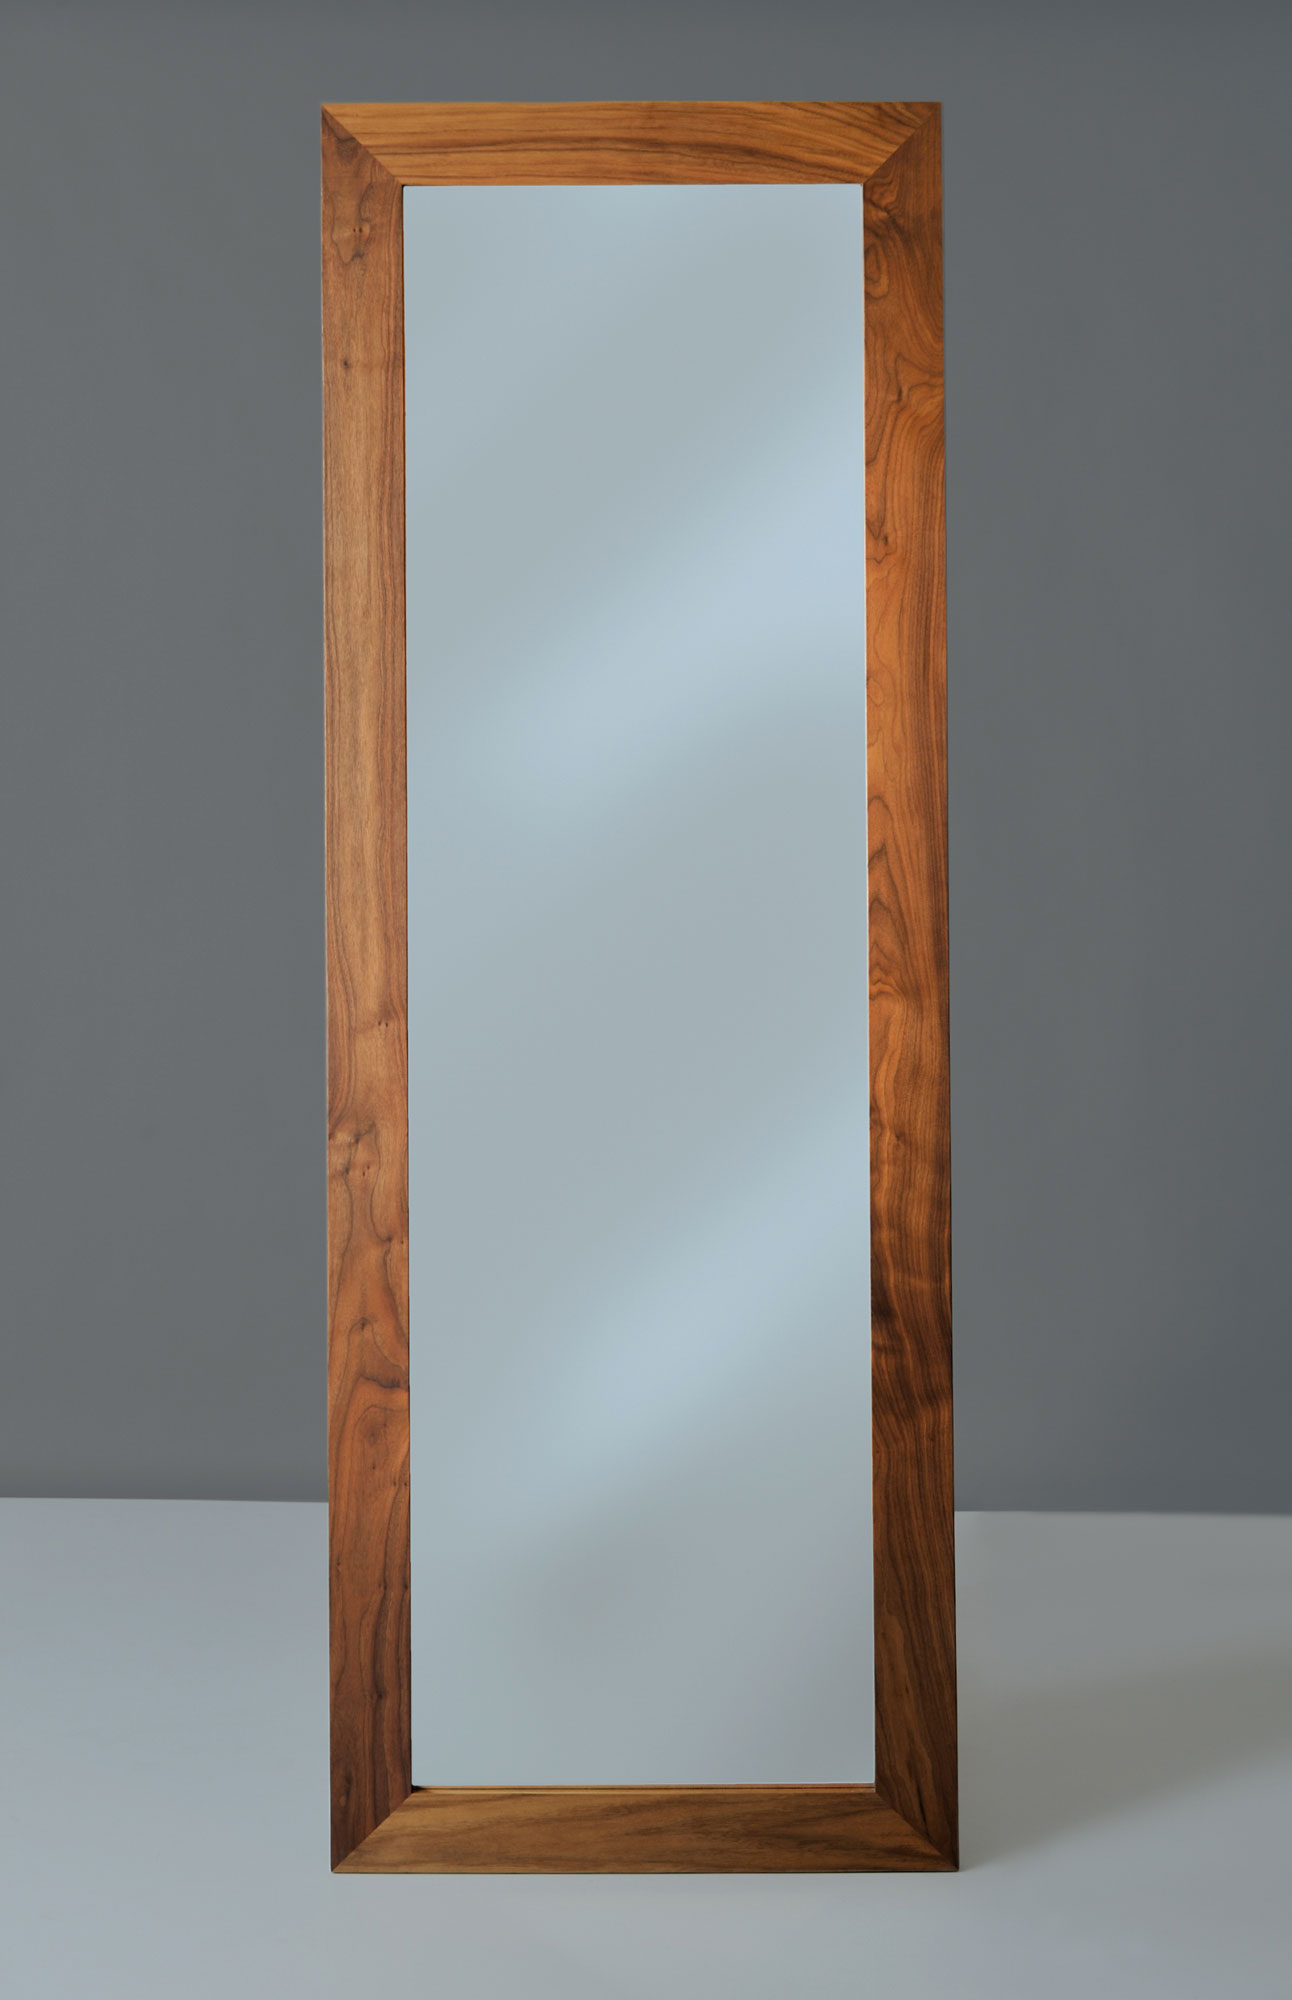 Solid Wood Mirror Accessory MIRROR nef9504 custom made in solid wood by vitamin design